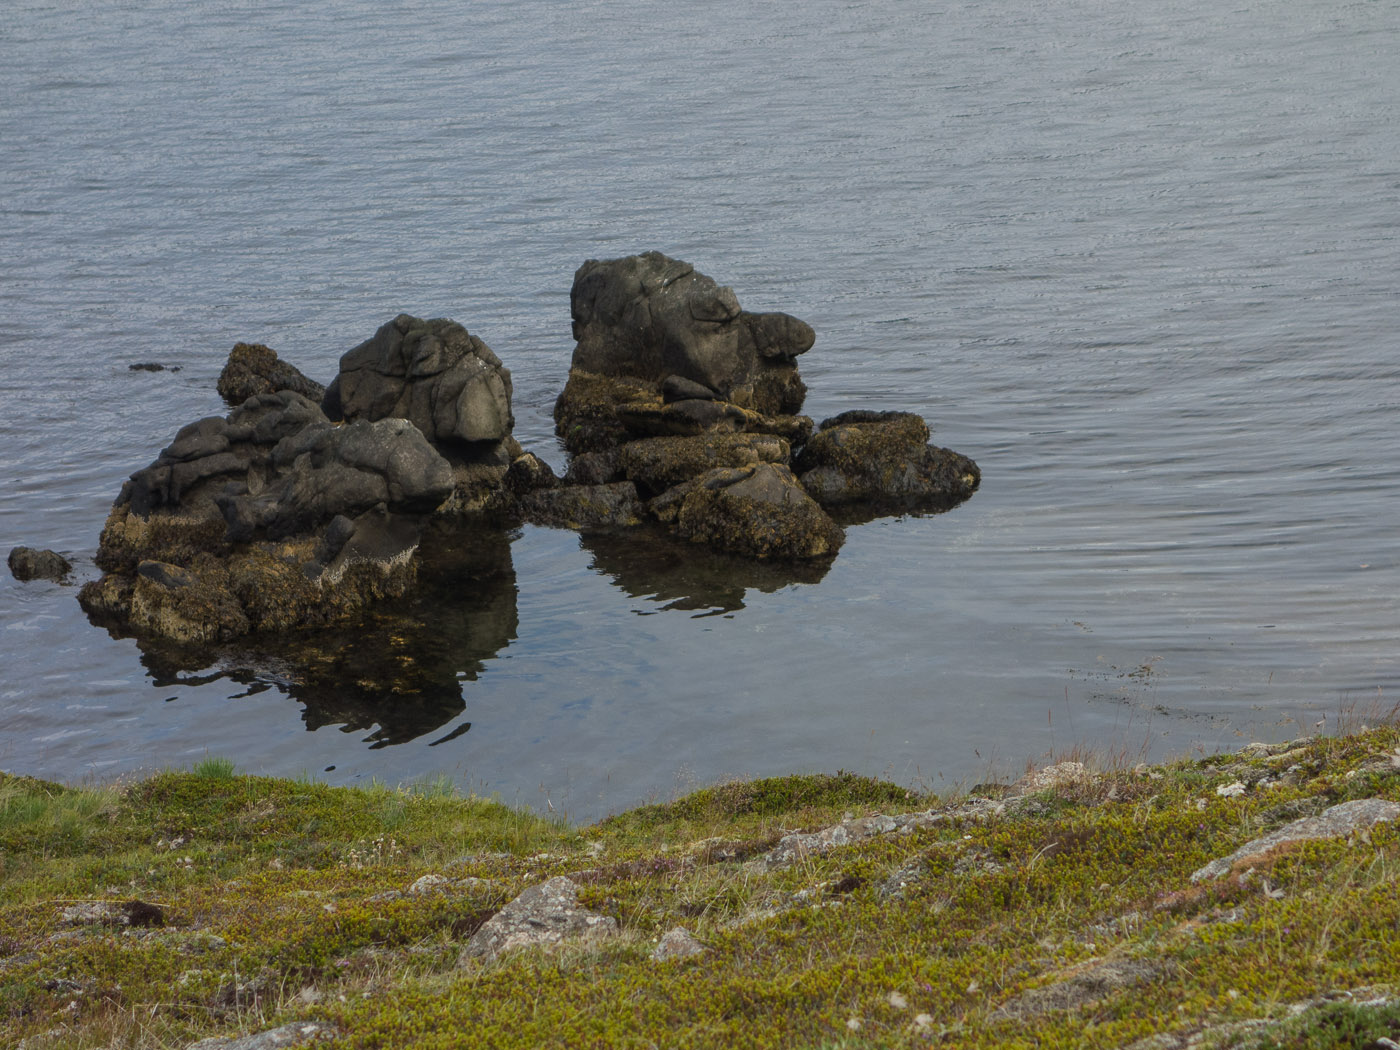 Northern Iceland - Hrísey island. On vacation. - <a href='http://www.hrisey.net/en/' target='_blank' class='linksnormal'>Hrísey</a>. Beside a lot of different birds also these two, or three, or one ... rocks? (22 July 2014)